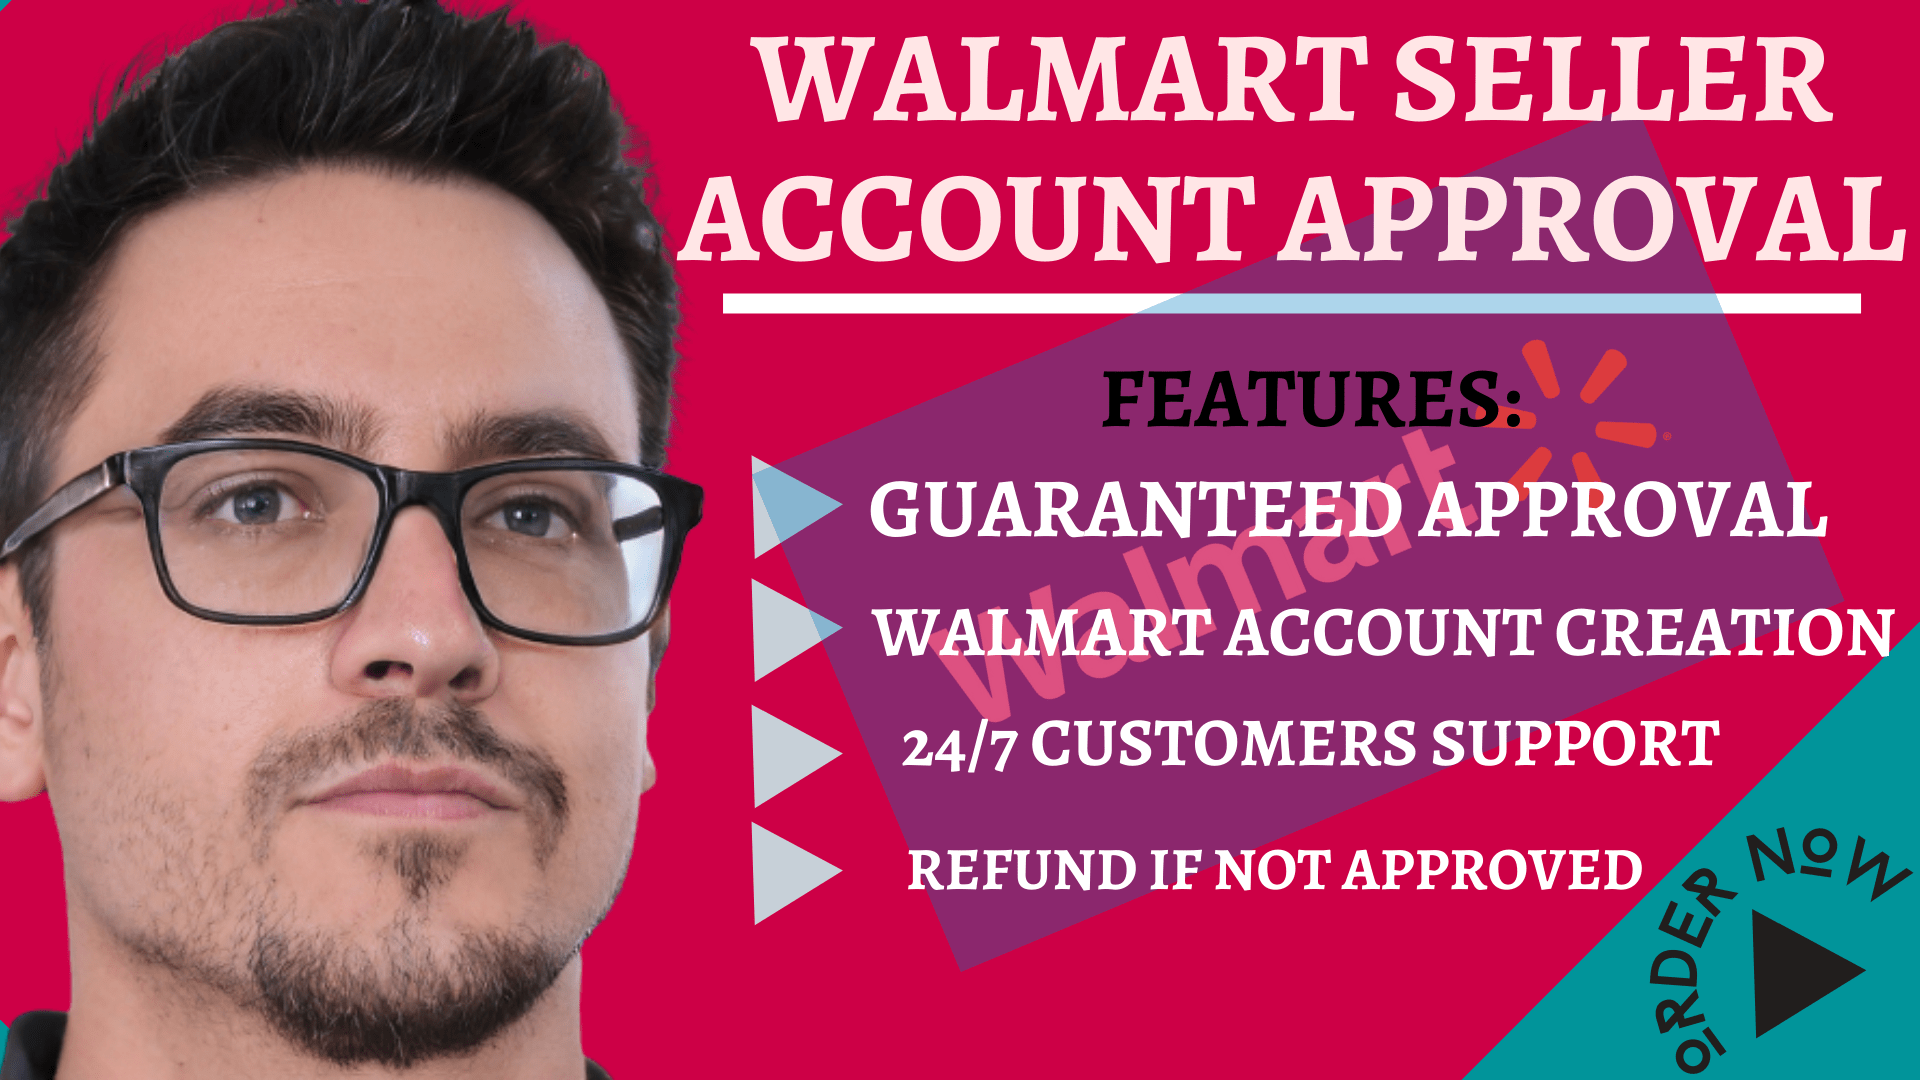 I will successfully create and approve Walmart Seller marketplace account, FiverrBox